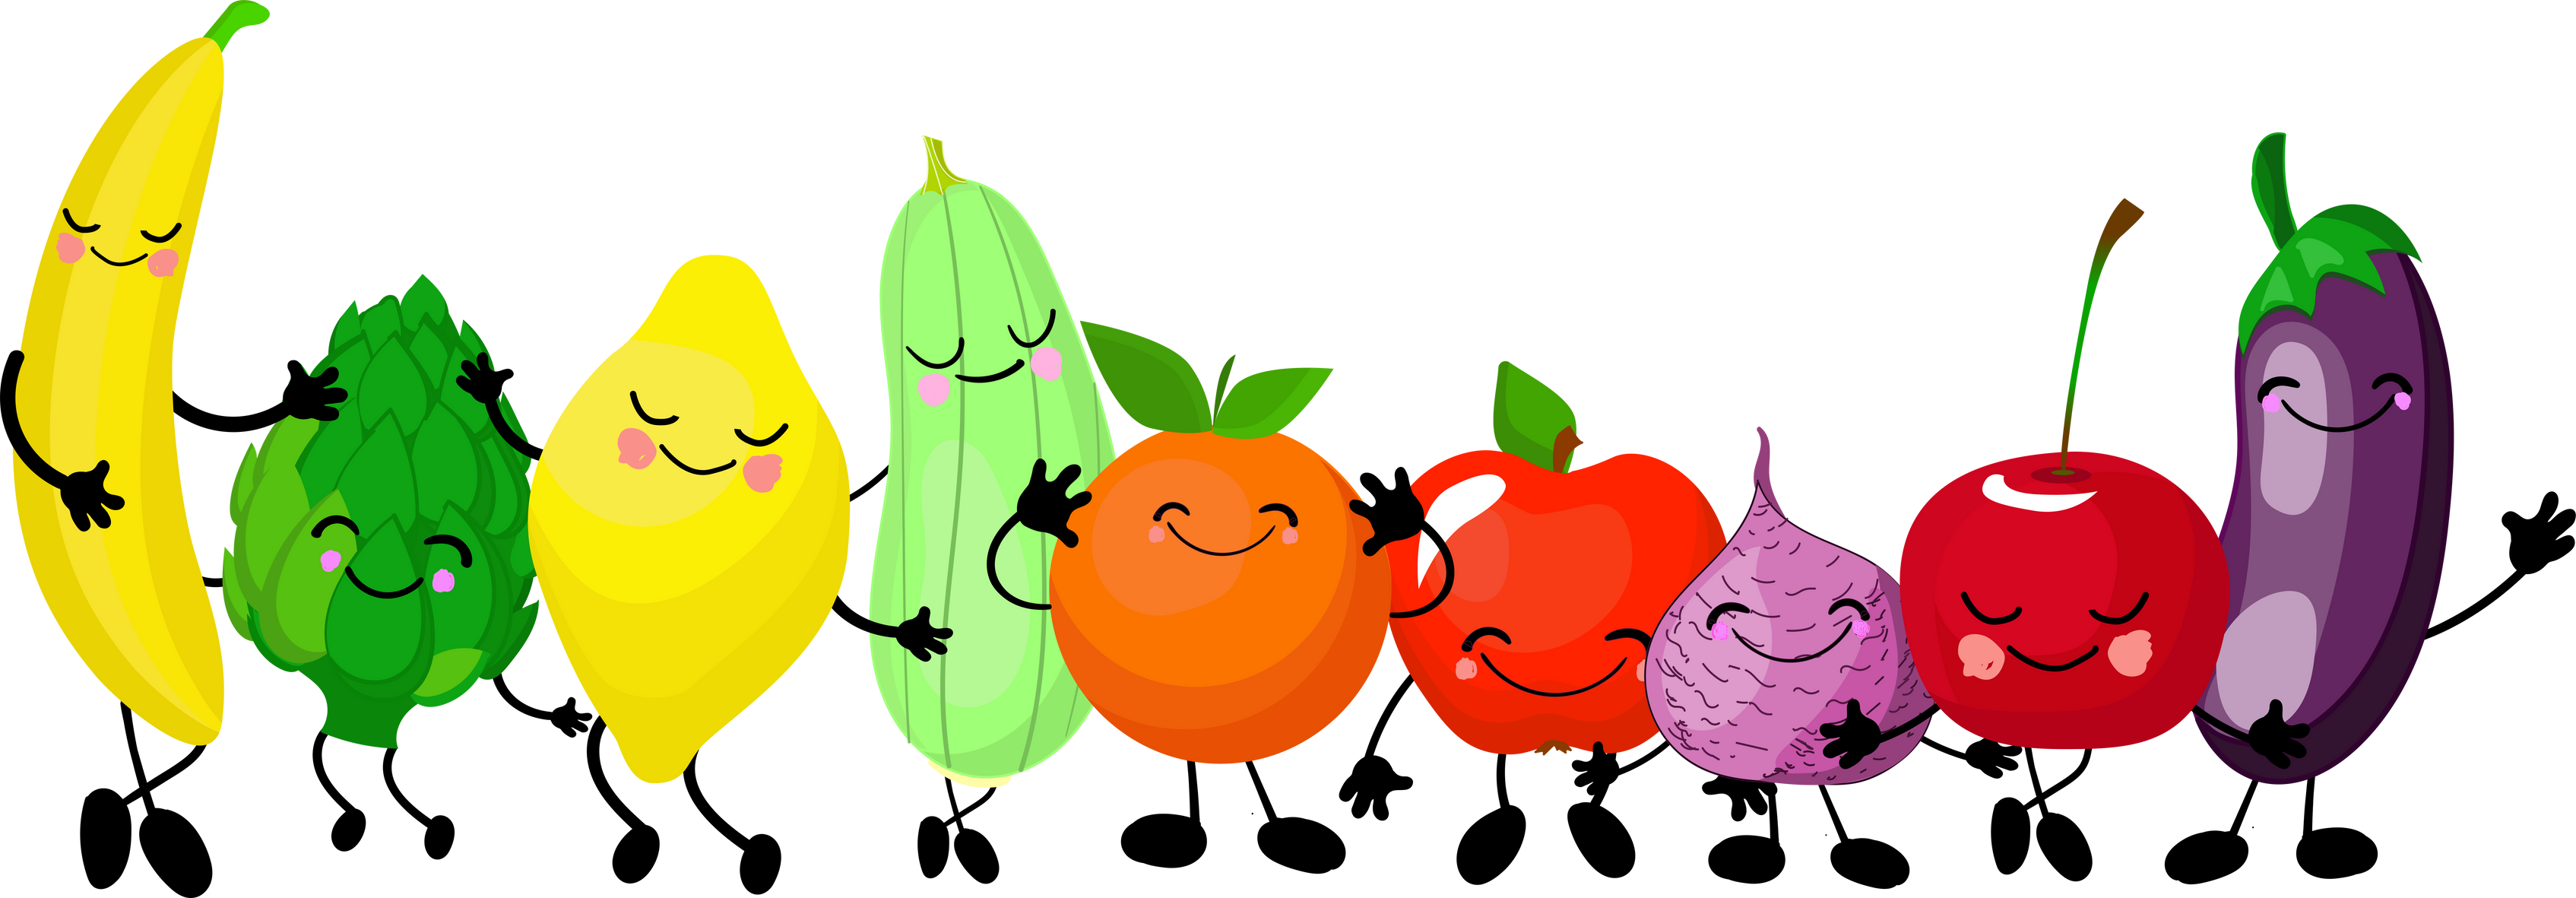 Cute funny vegetables and fruits. Fruit characters for children. healthy vegetables